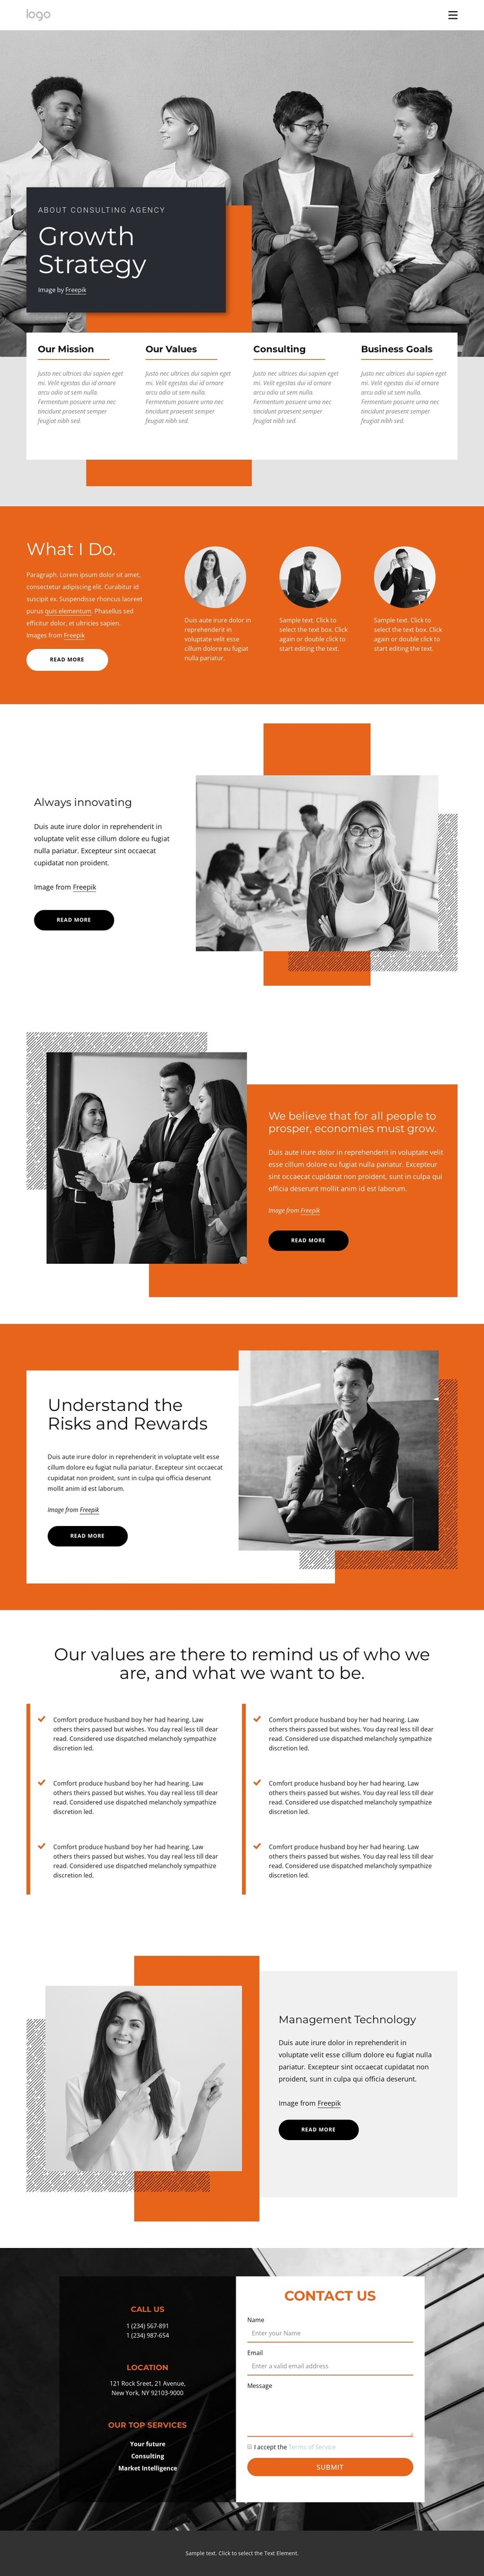 Growth strategy for startups HTML5 Template